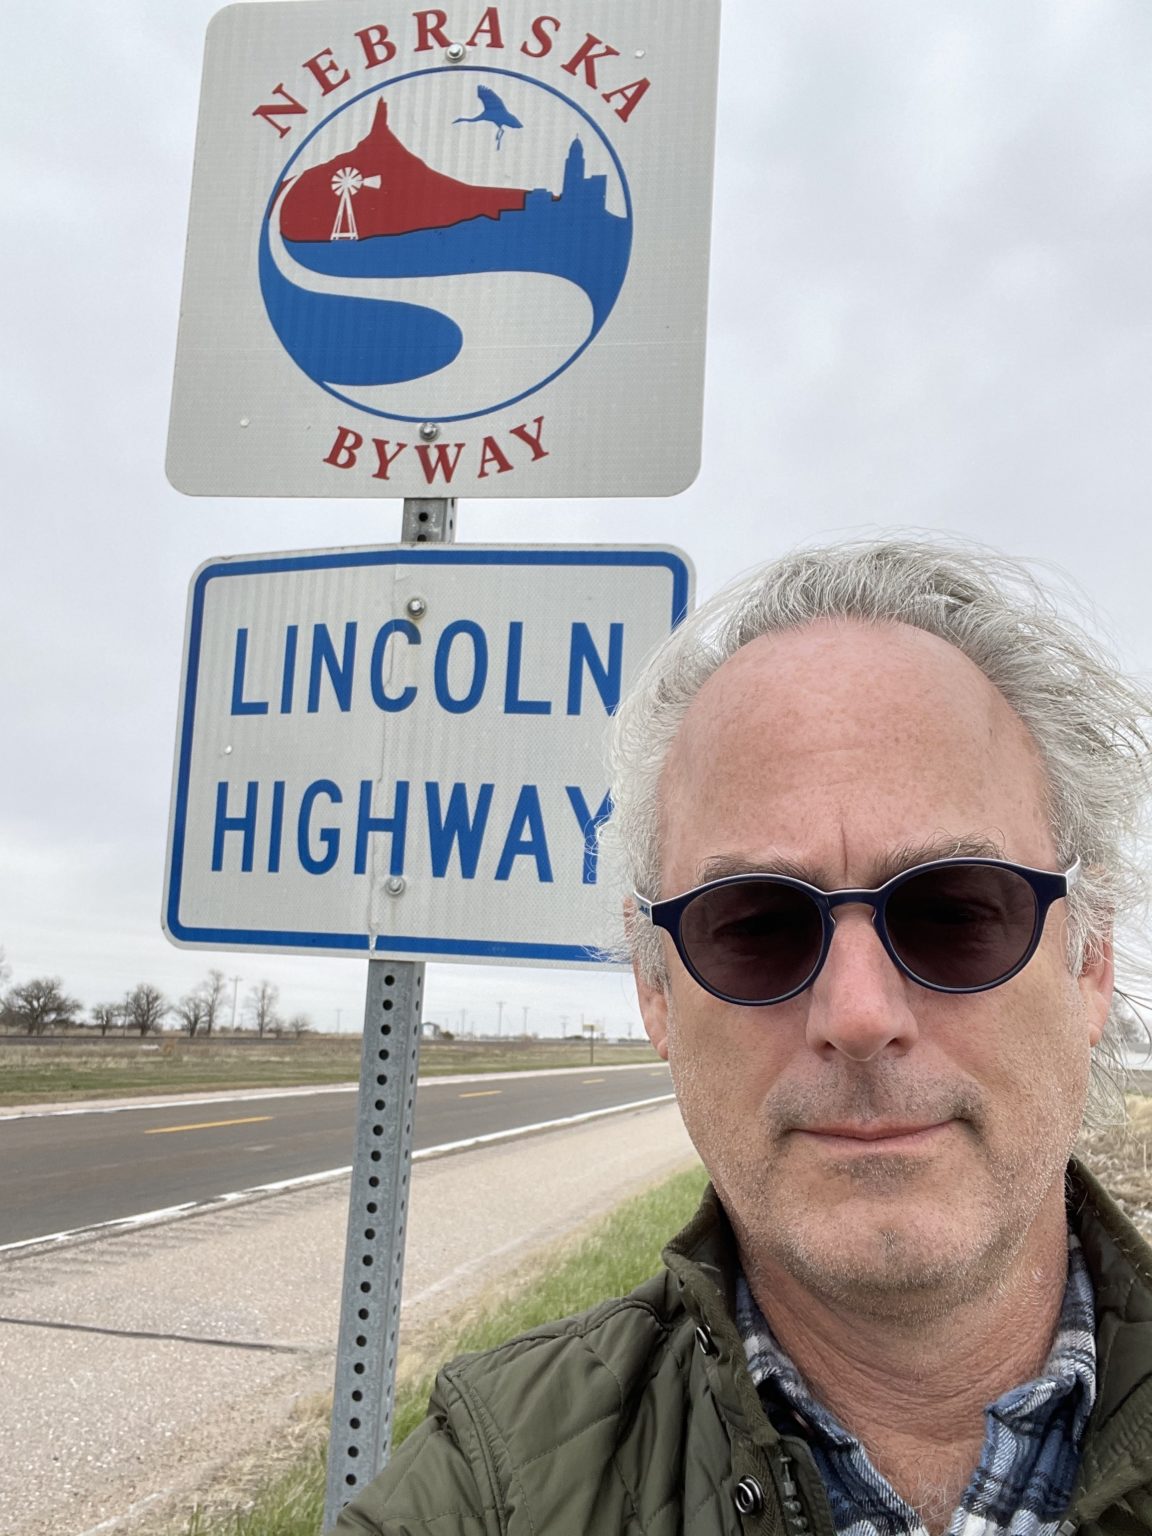 The Lincoln Highway by Amor Towles